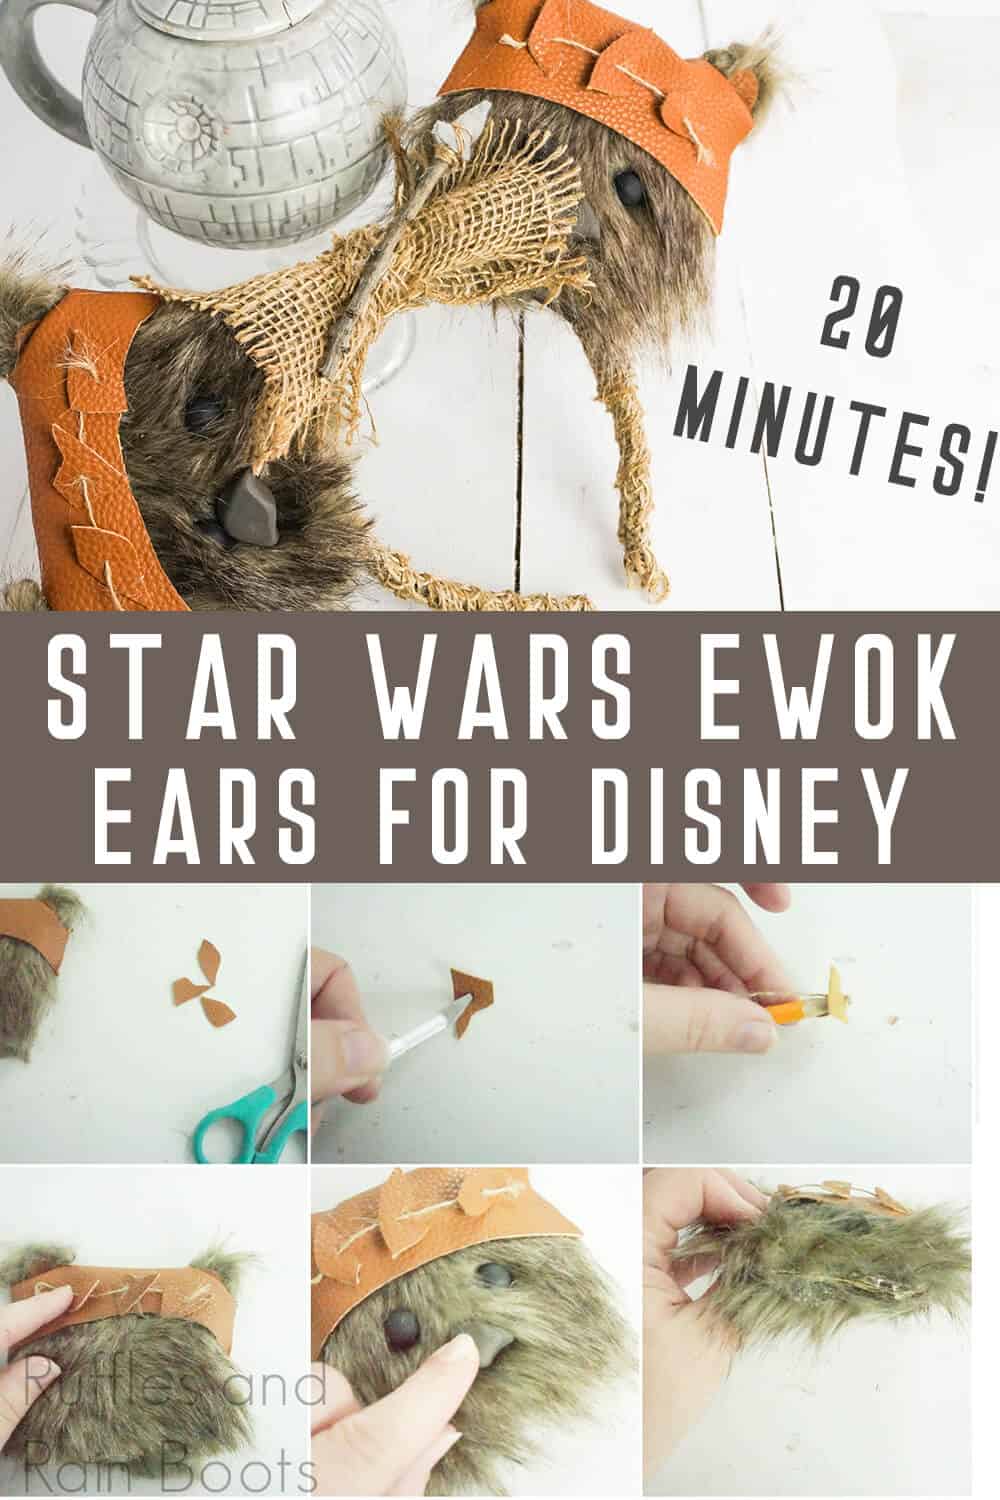 photo collage of how to make star wars galaxy's edge mickey ears ewoks with text which reads star wars ewok ears for disney 20 minutes!